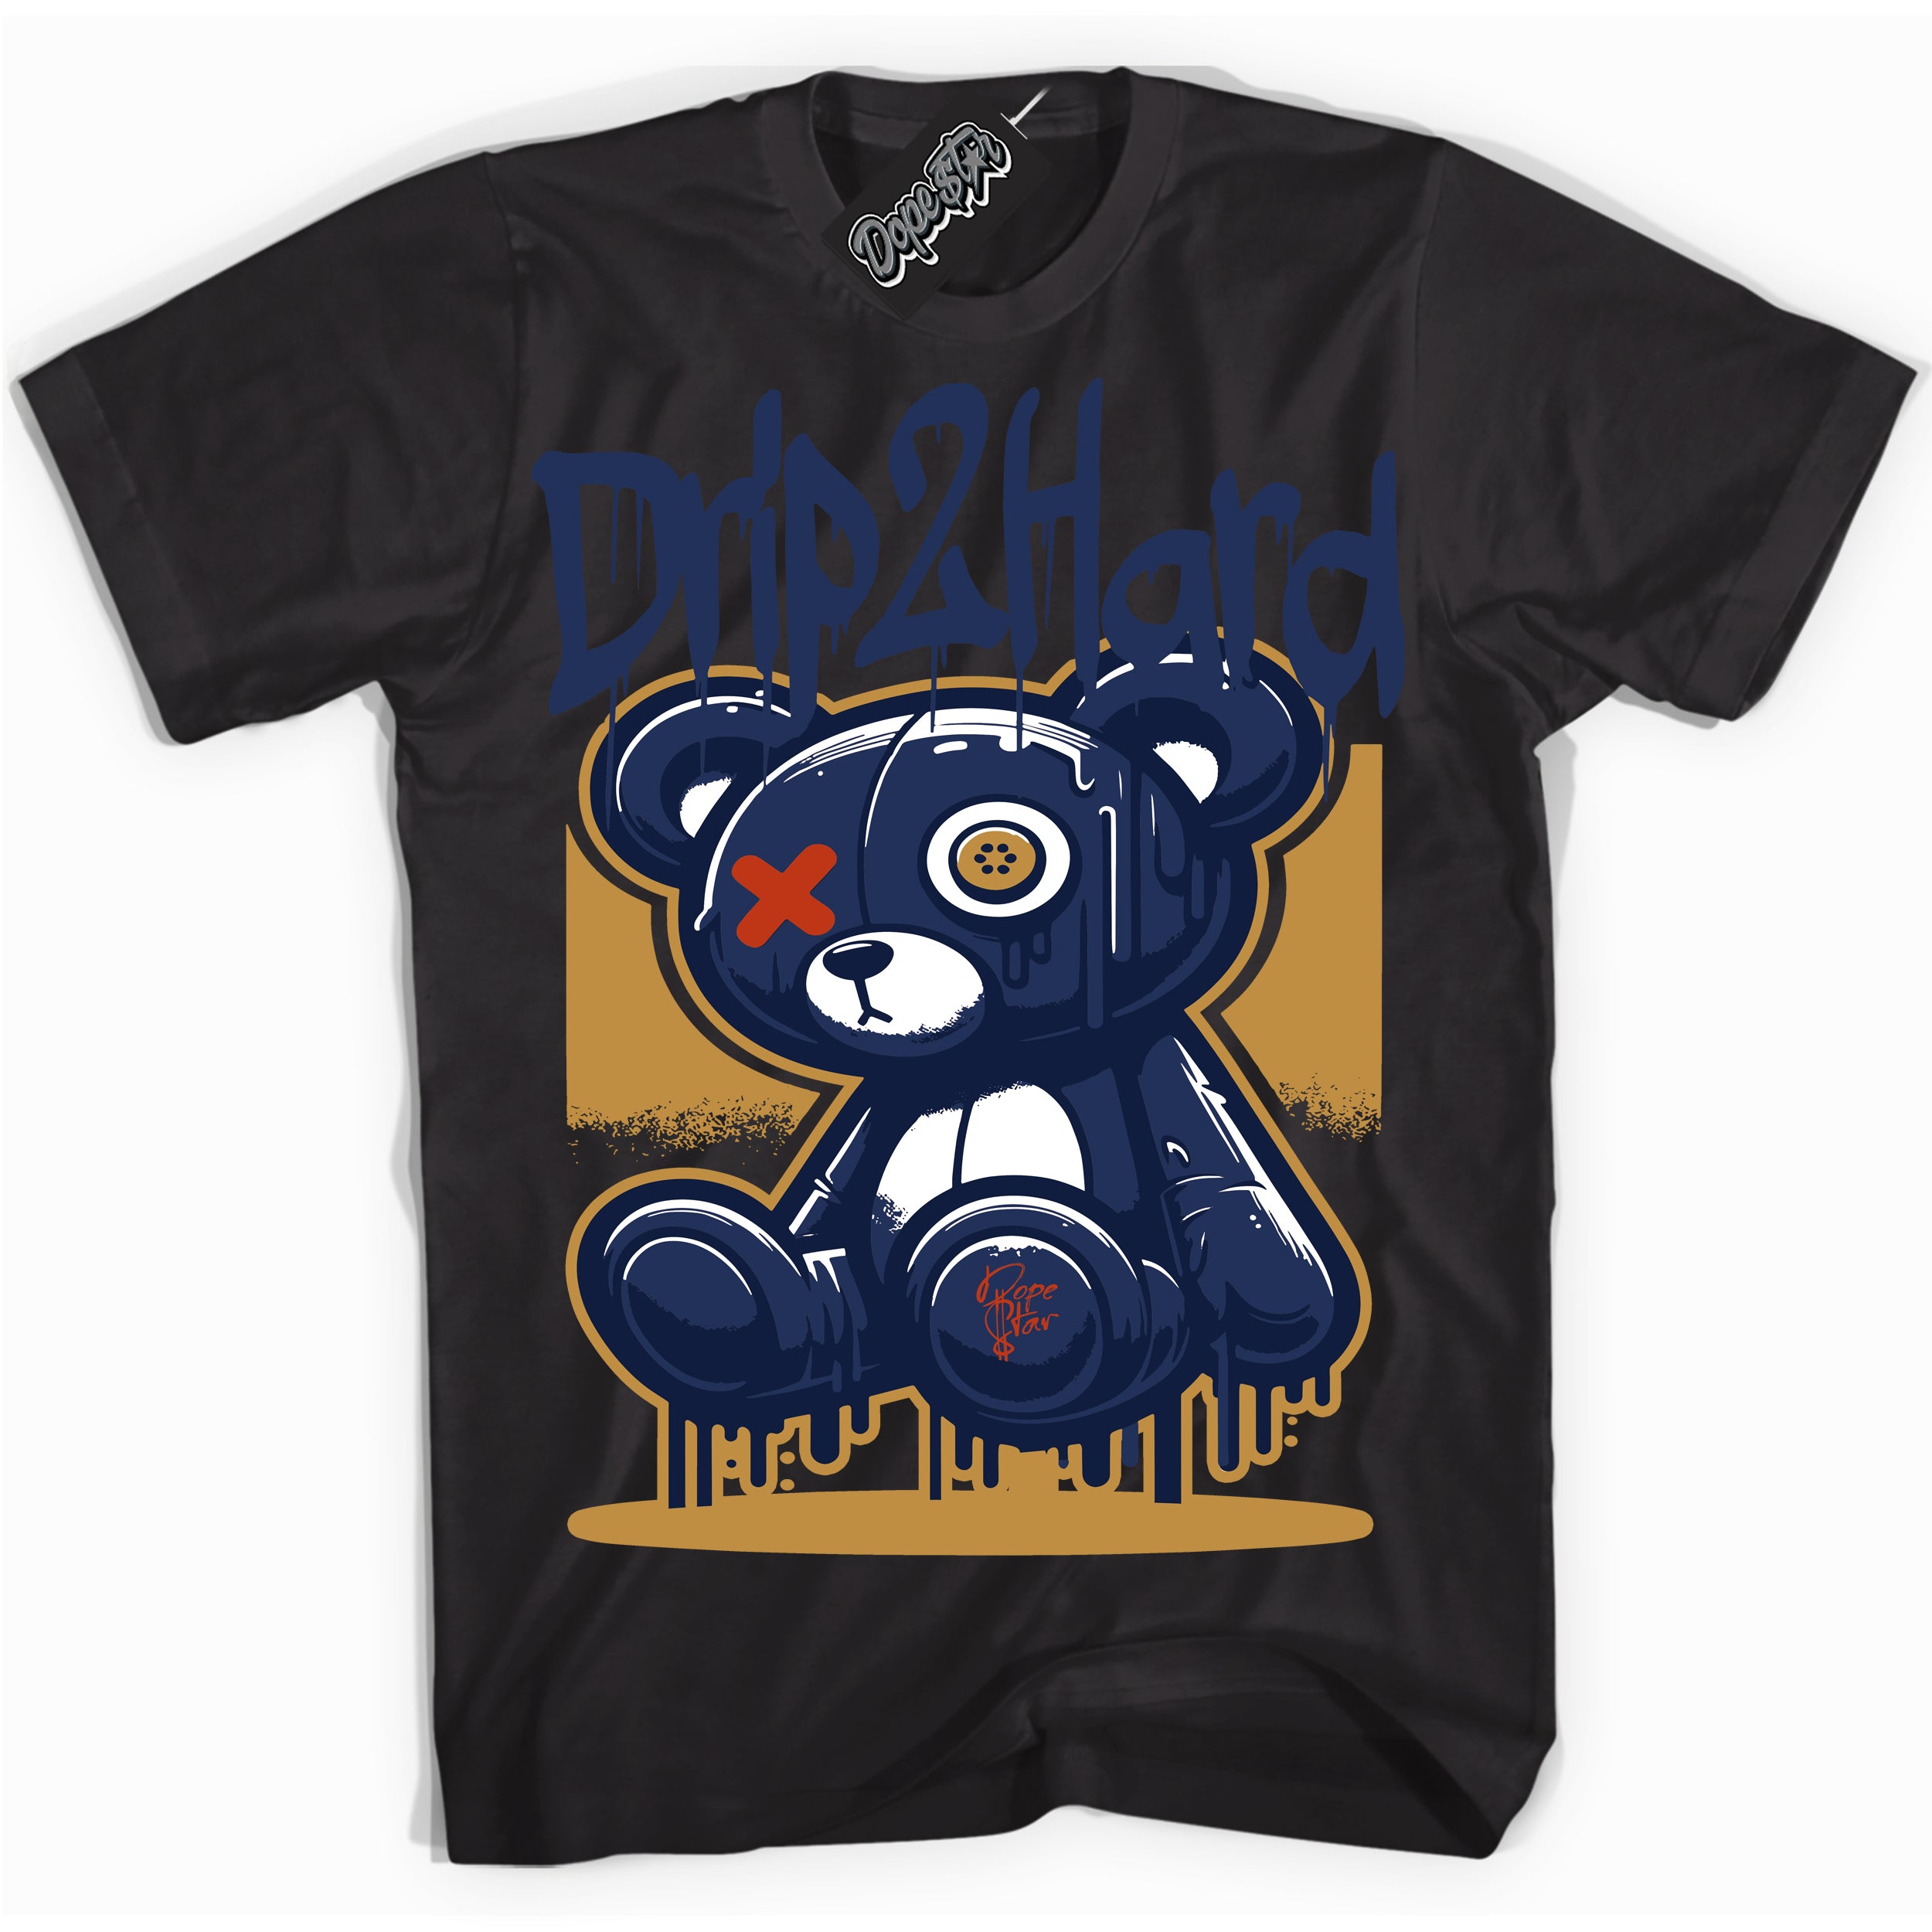 Cool Black graphic tee with “ Drip 2 Hard ” design, that perfectly matches Orange Label Navy Gum